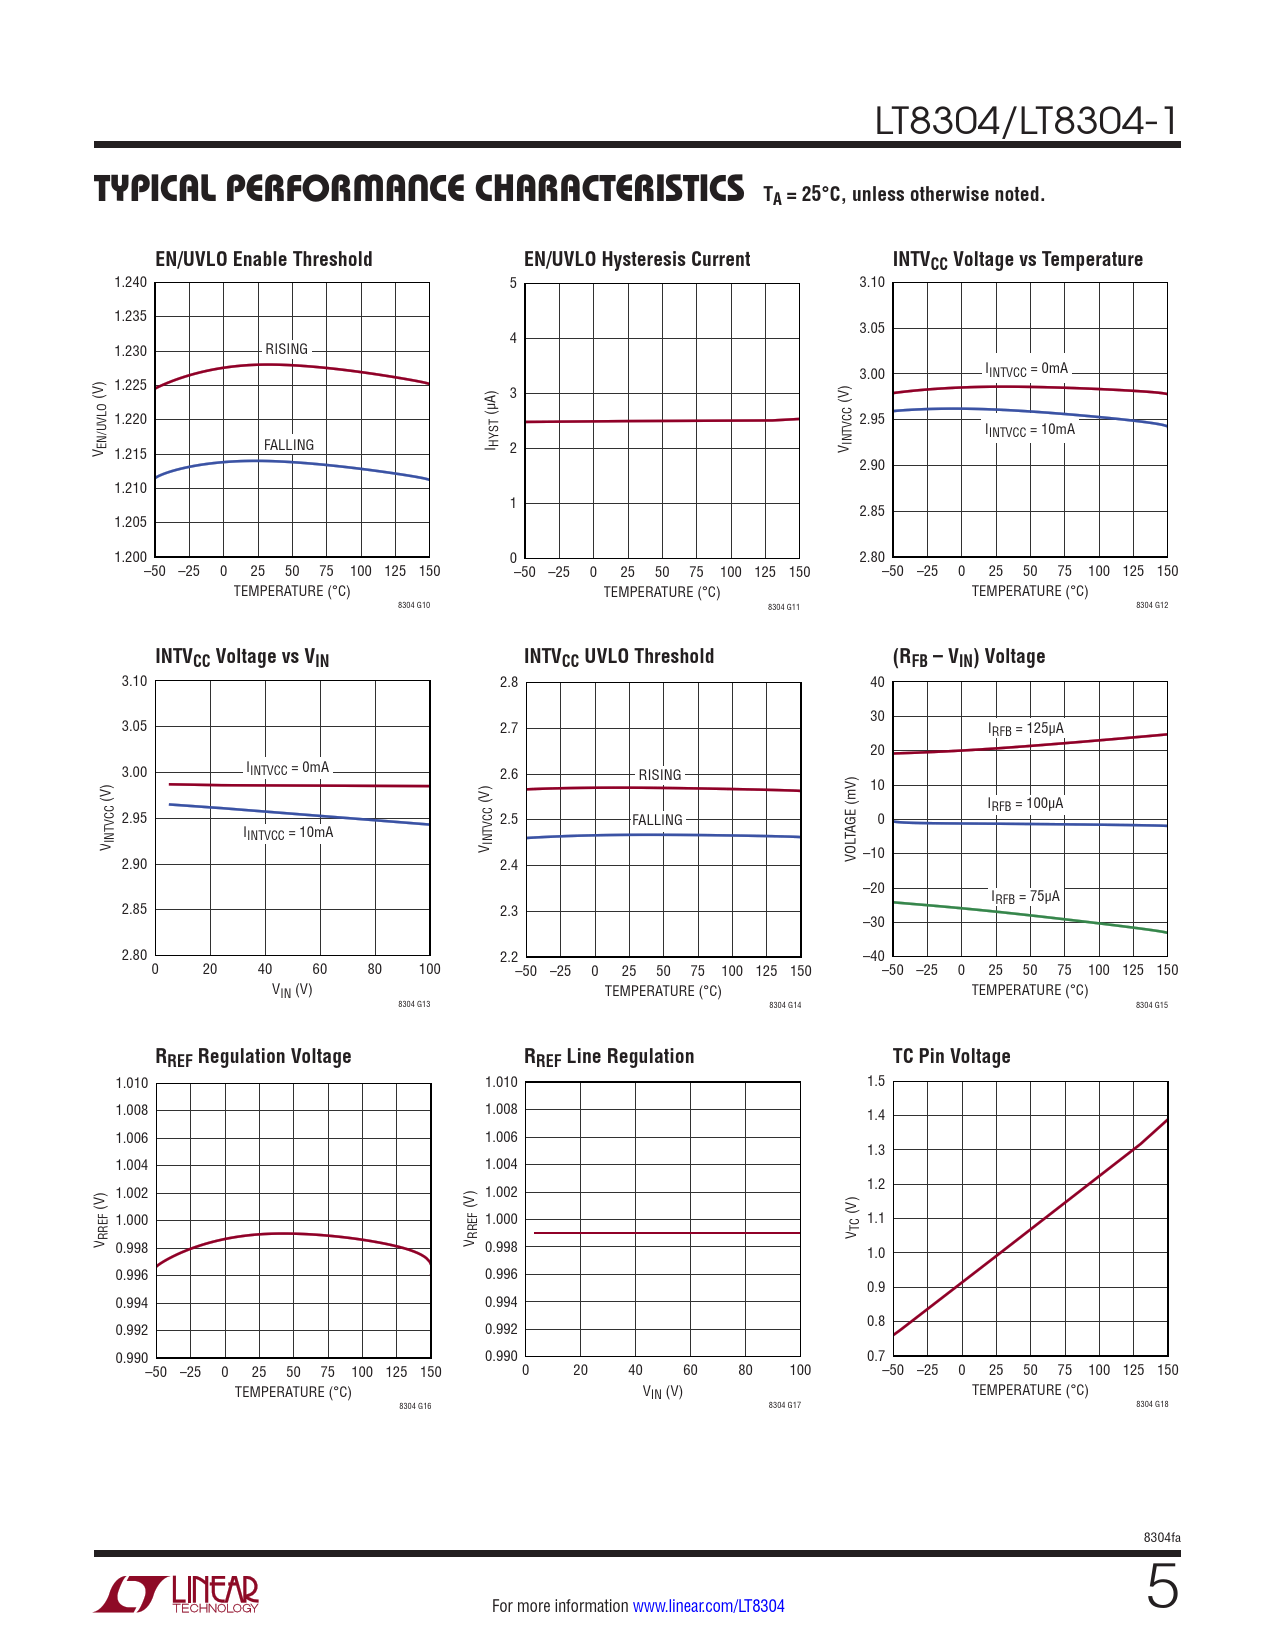 TYPICAL PERFORMANCE CHARACTERISTICS TA = 25°C, unless otherwise noted EN/UVLO Enable Threshold EN/UVLO Hysteresis Current